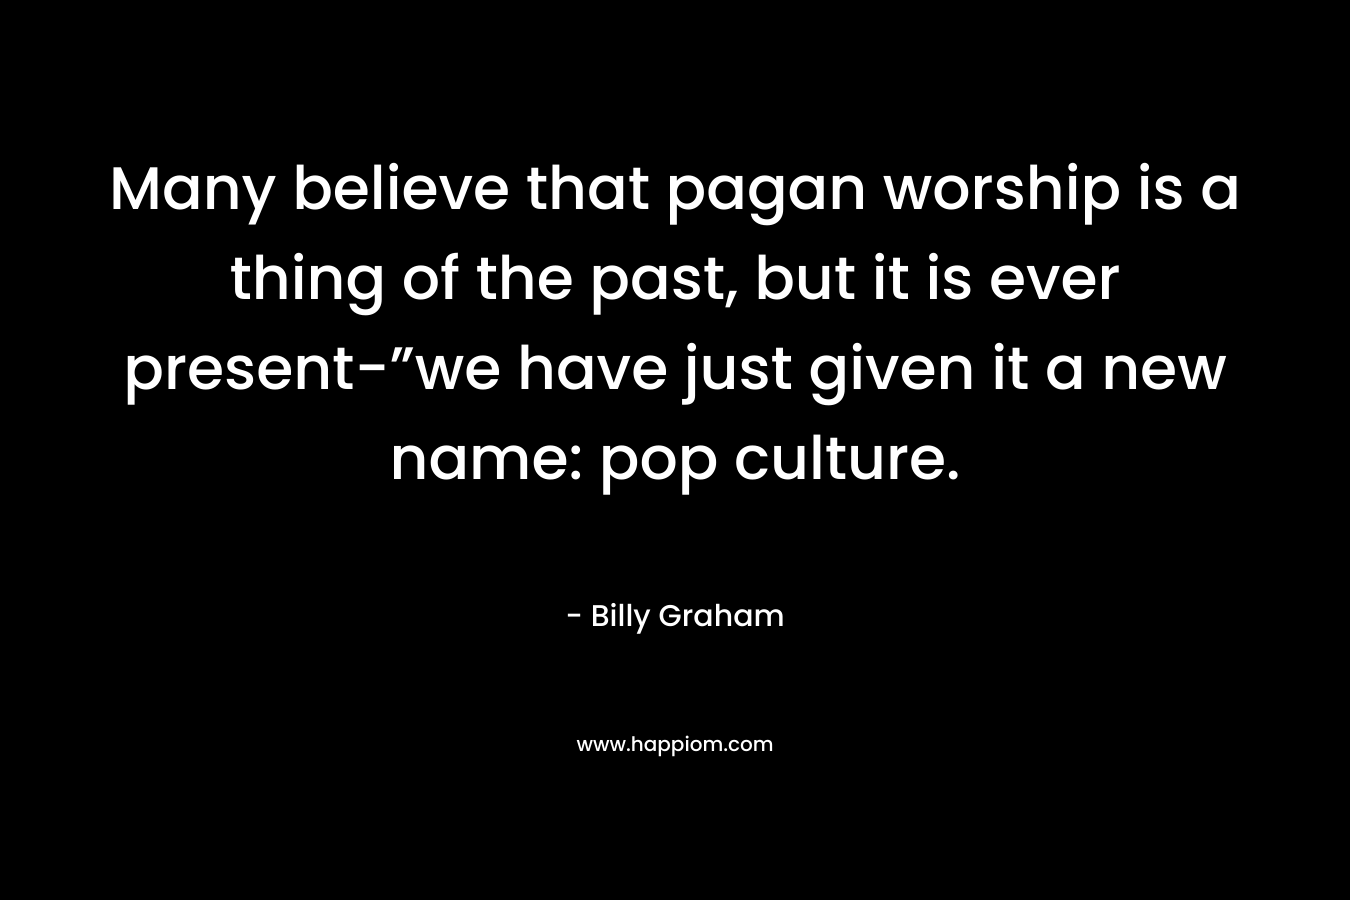 Many believe that pagan worship is a thing of the past, but it is ever present-”we have just given it a new name: pop culture. – Billy Graham